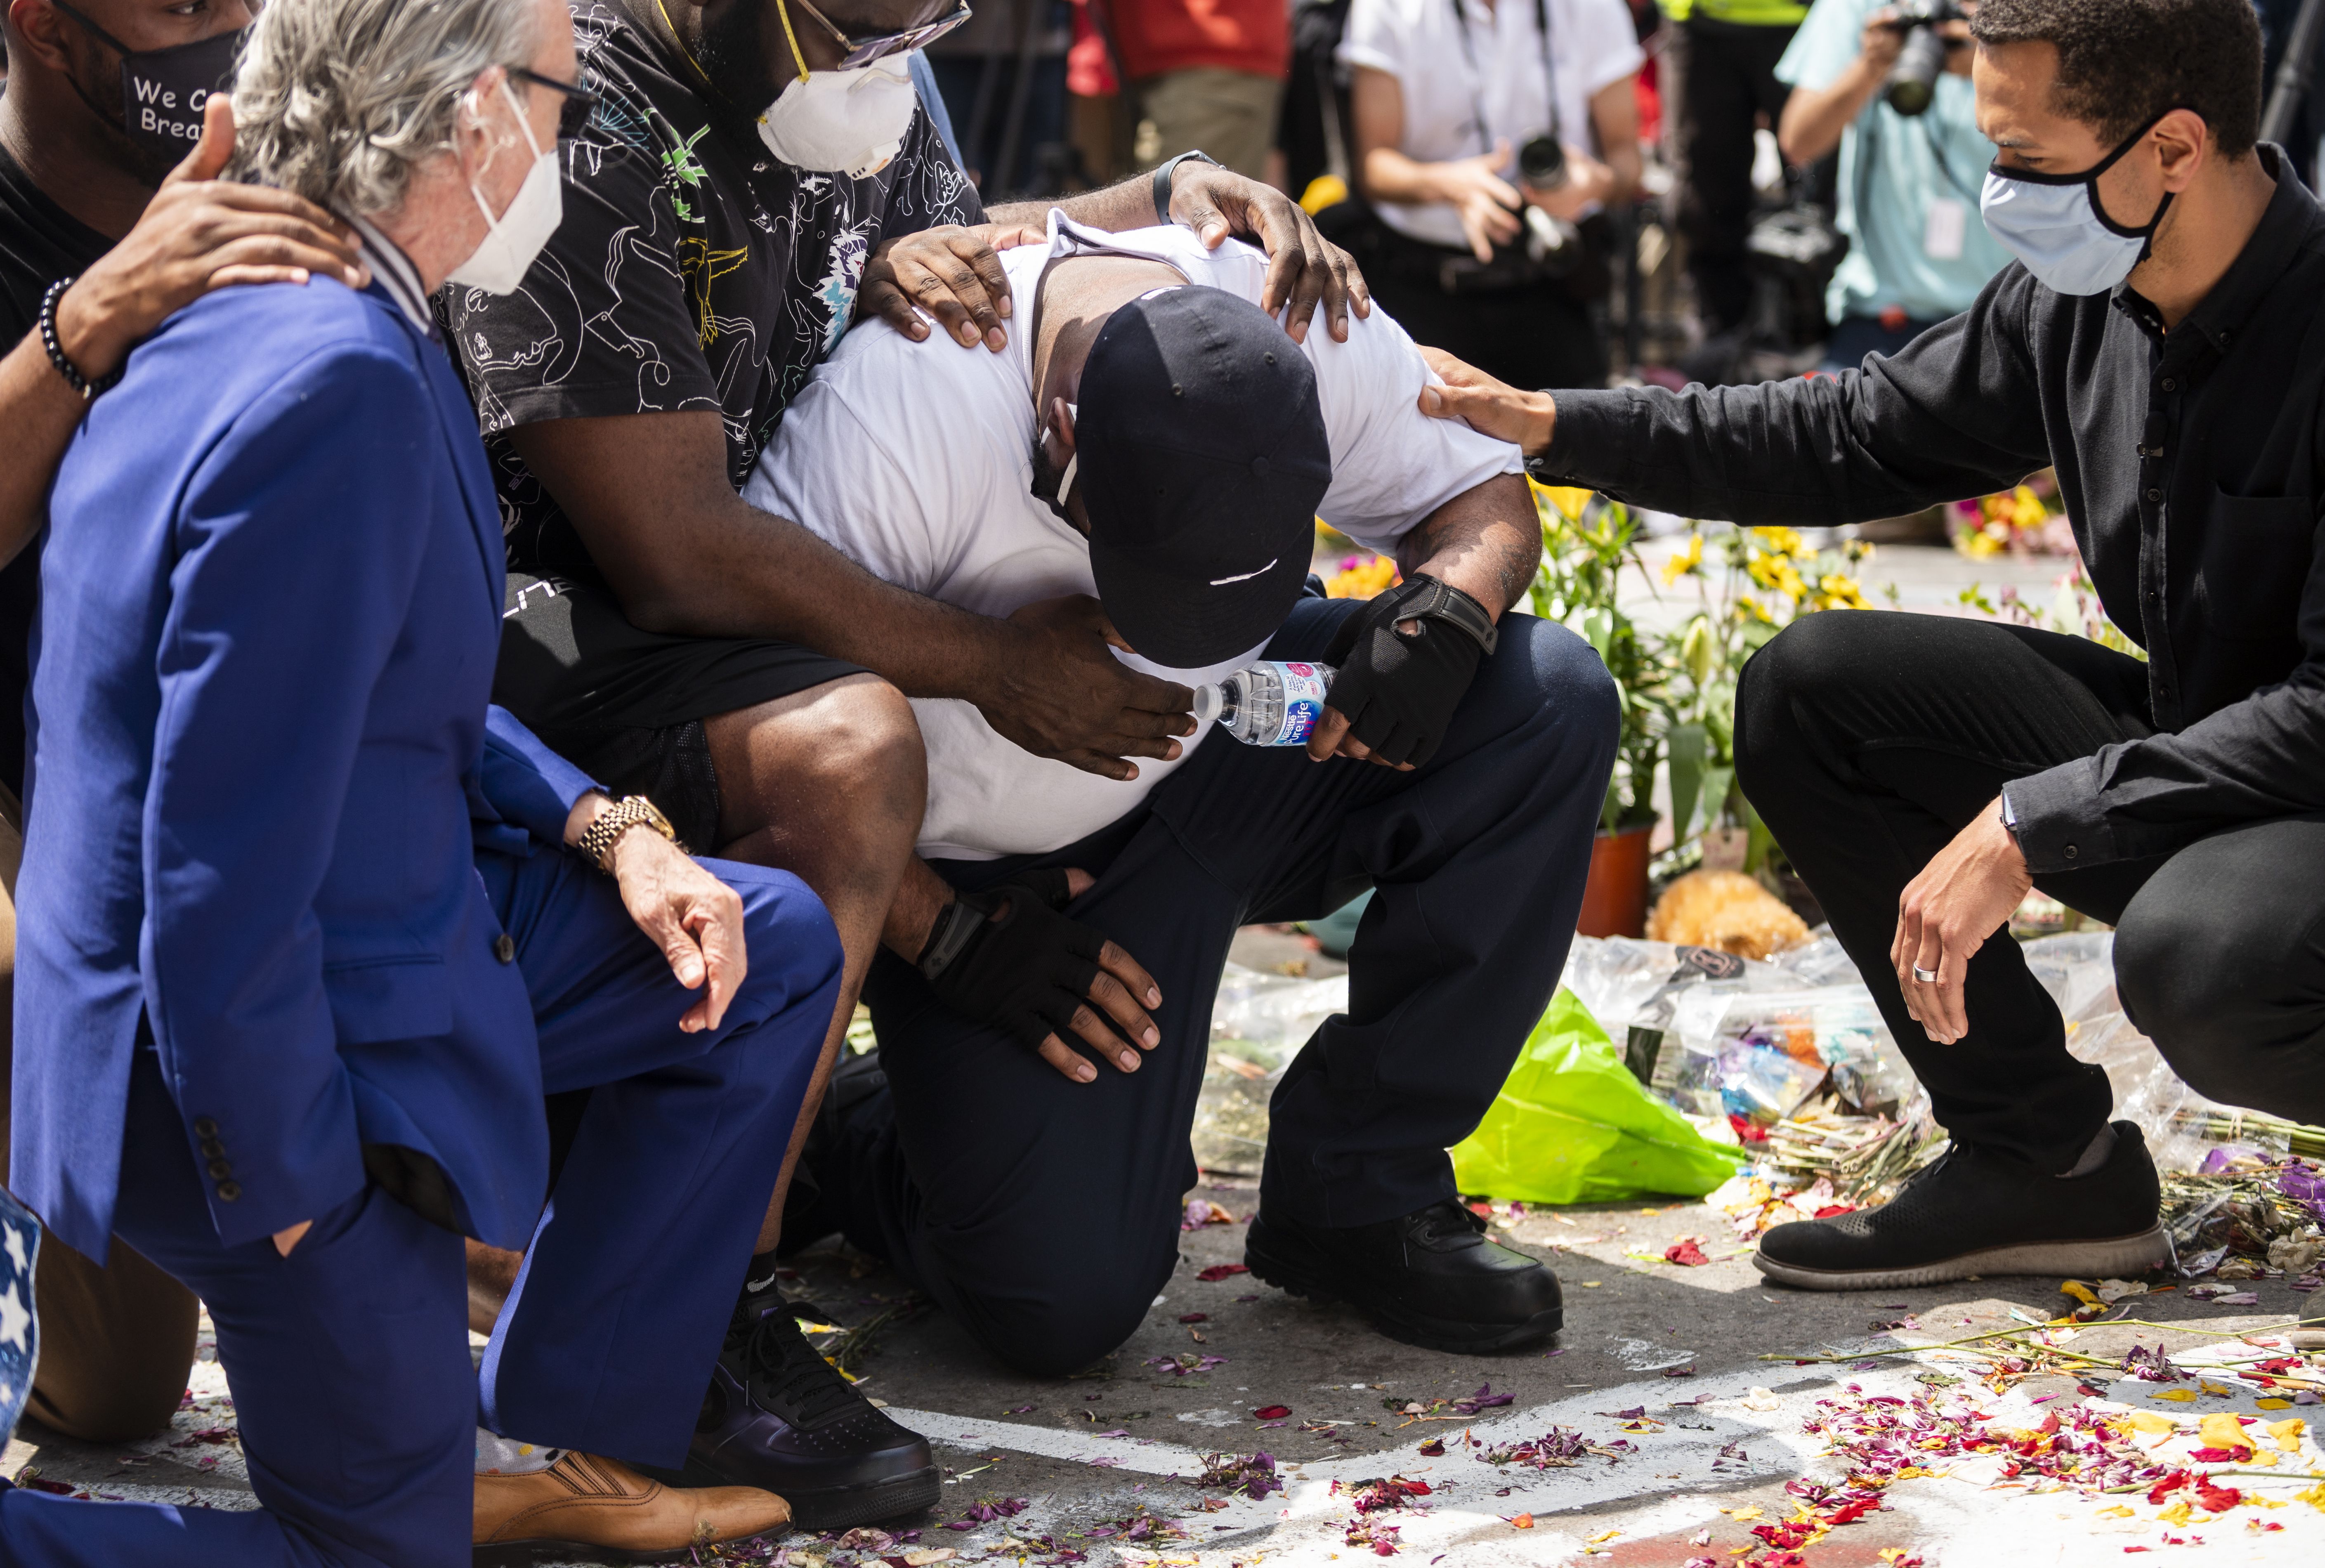 errence Floyd (C) falls to his knees at the site where his brother George Floyd was killed by police one week ago on June 1, 2020 in Minneapolis, Minnesota.